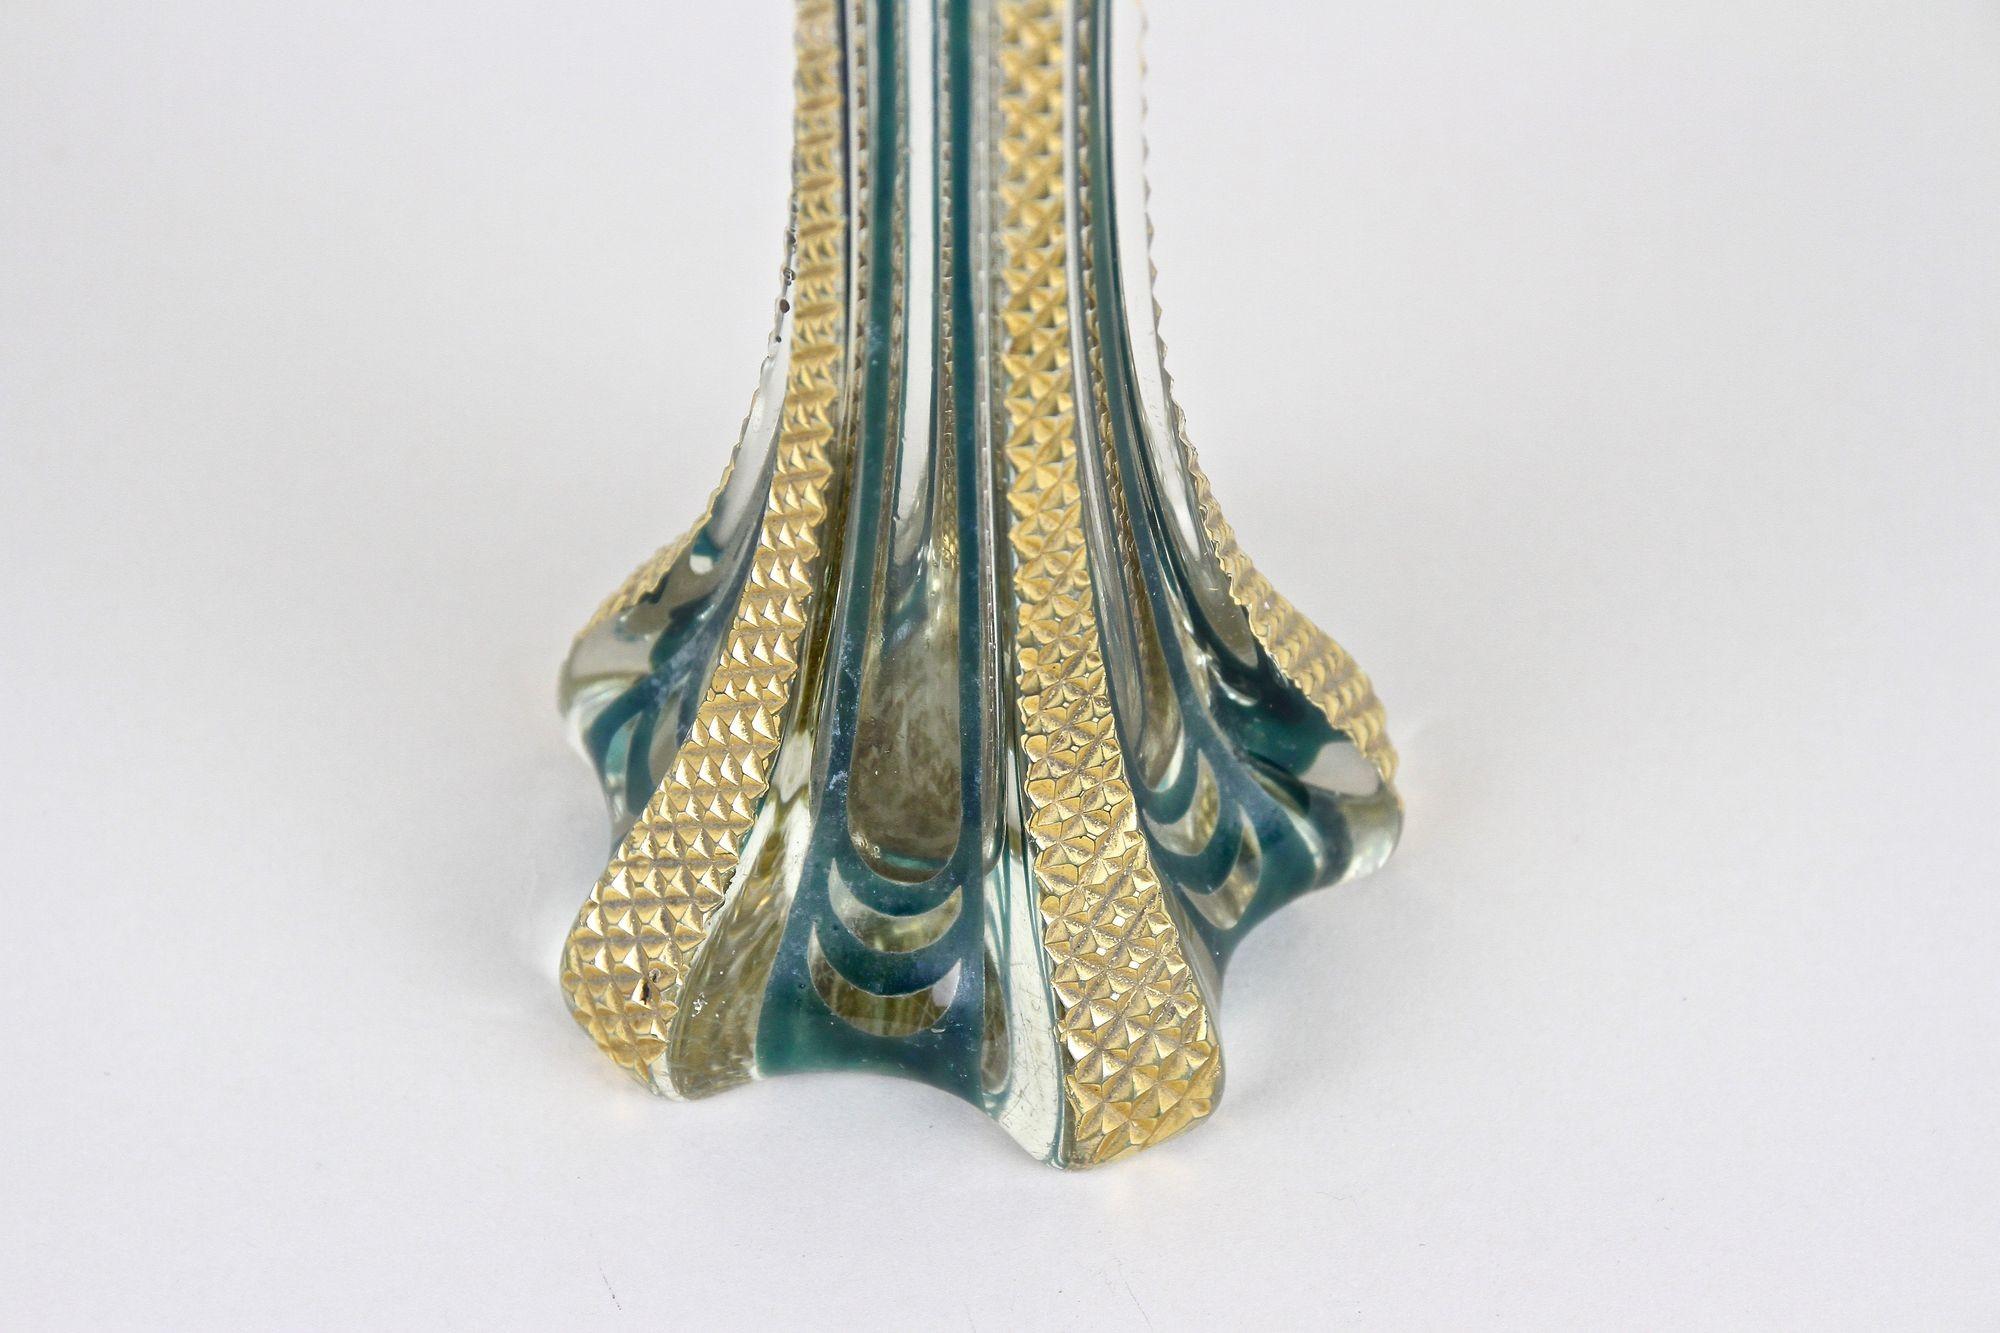 Murano Glass Vase With Gold Accents, Early 20th Century - Italy ca. 1930 For Sale 8